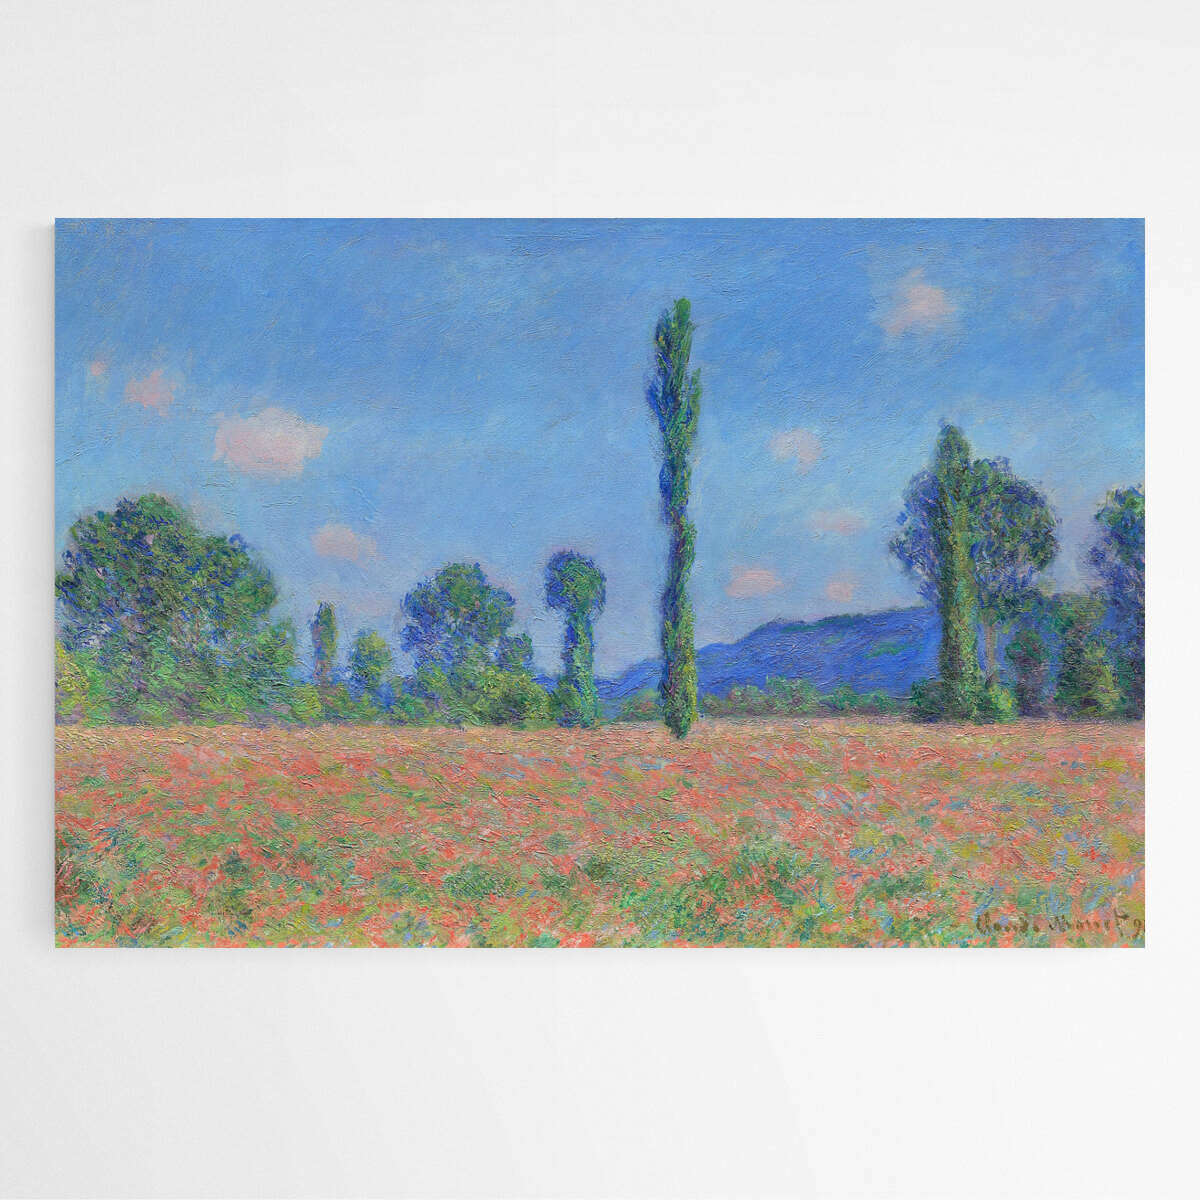 Poppy Field Giverny by Claude Monet | Claude Monet Wall Art Prints - The Canvas Hive